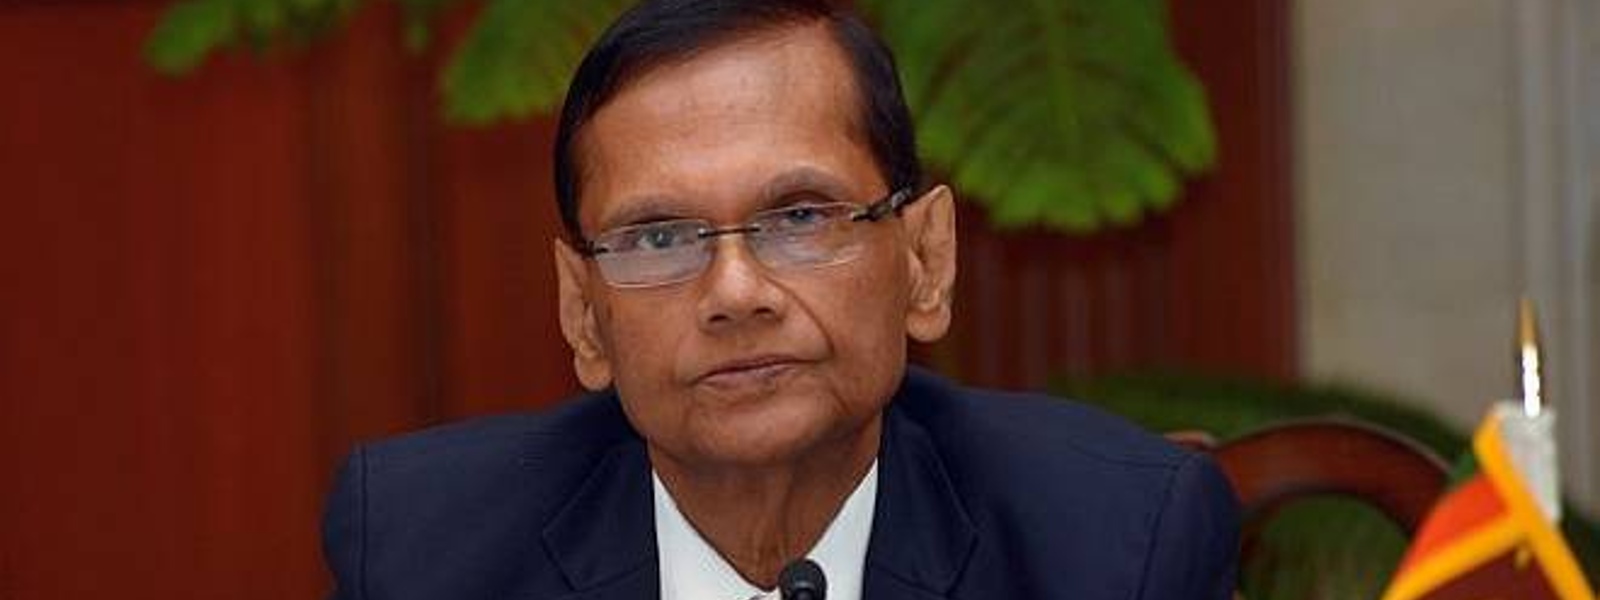 Foreign Minister G. L. Peiris off to India during weekend on official visit